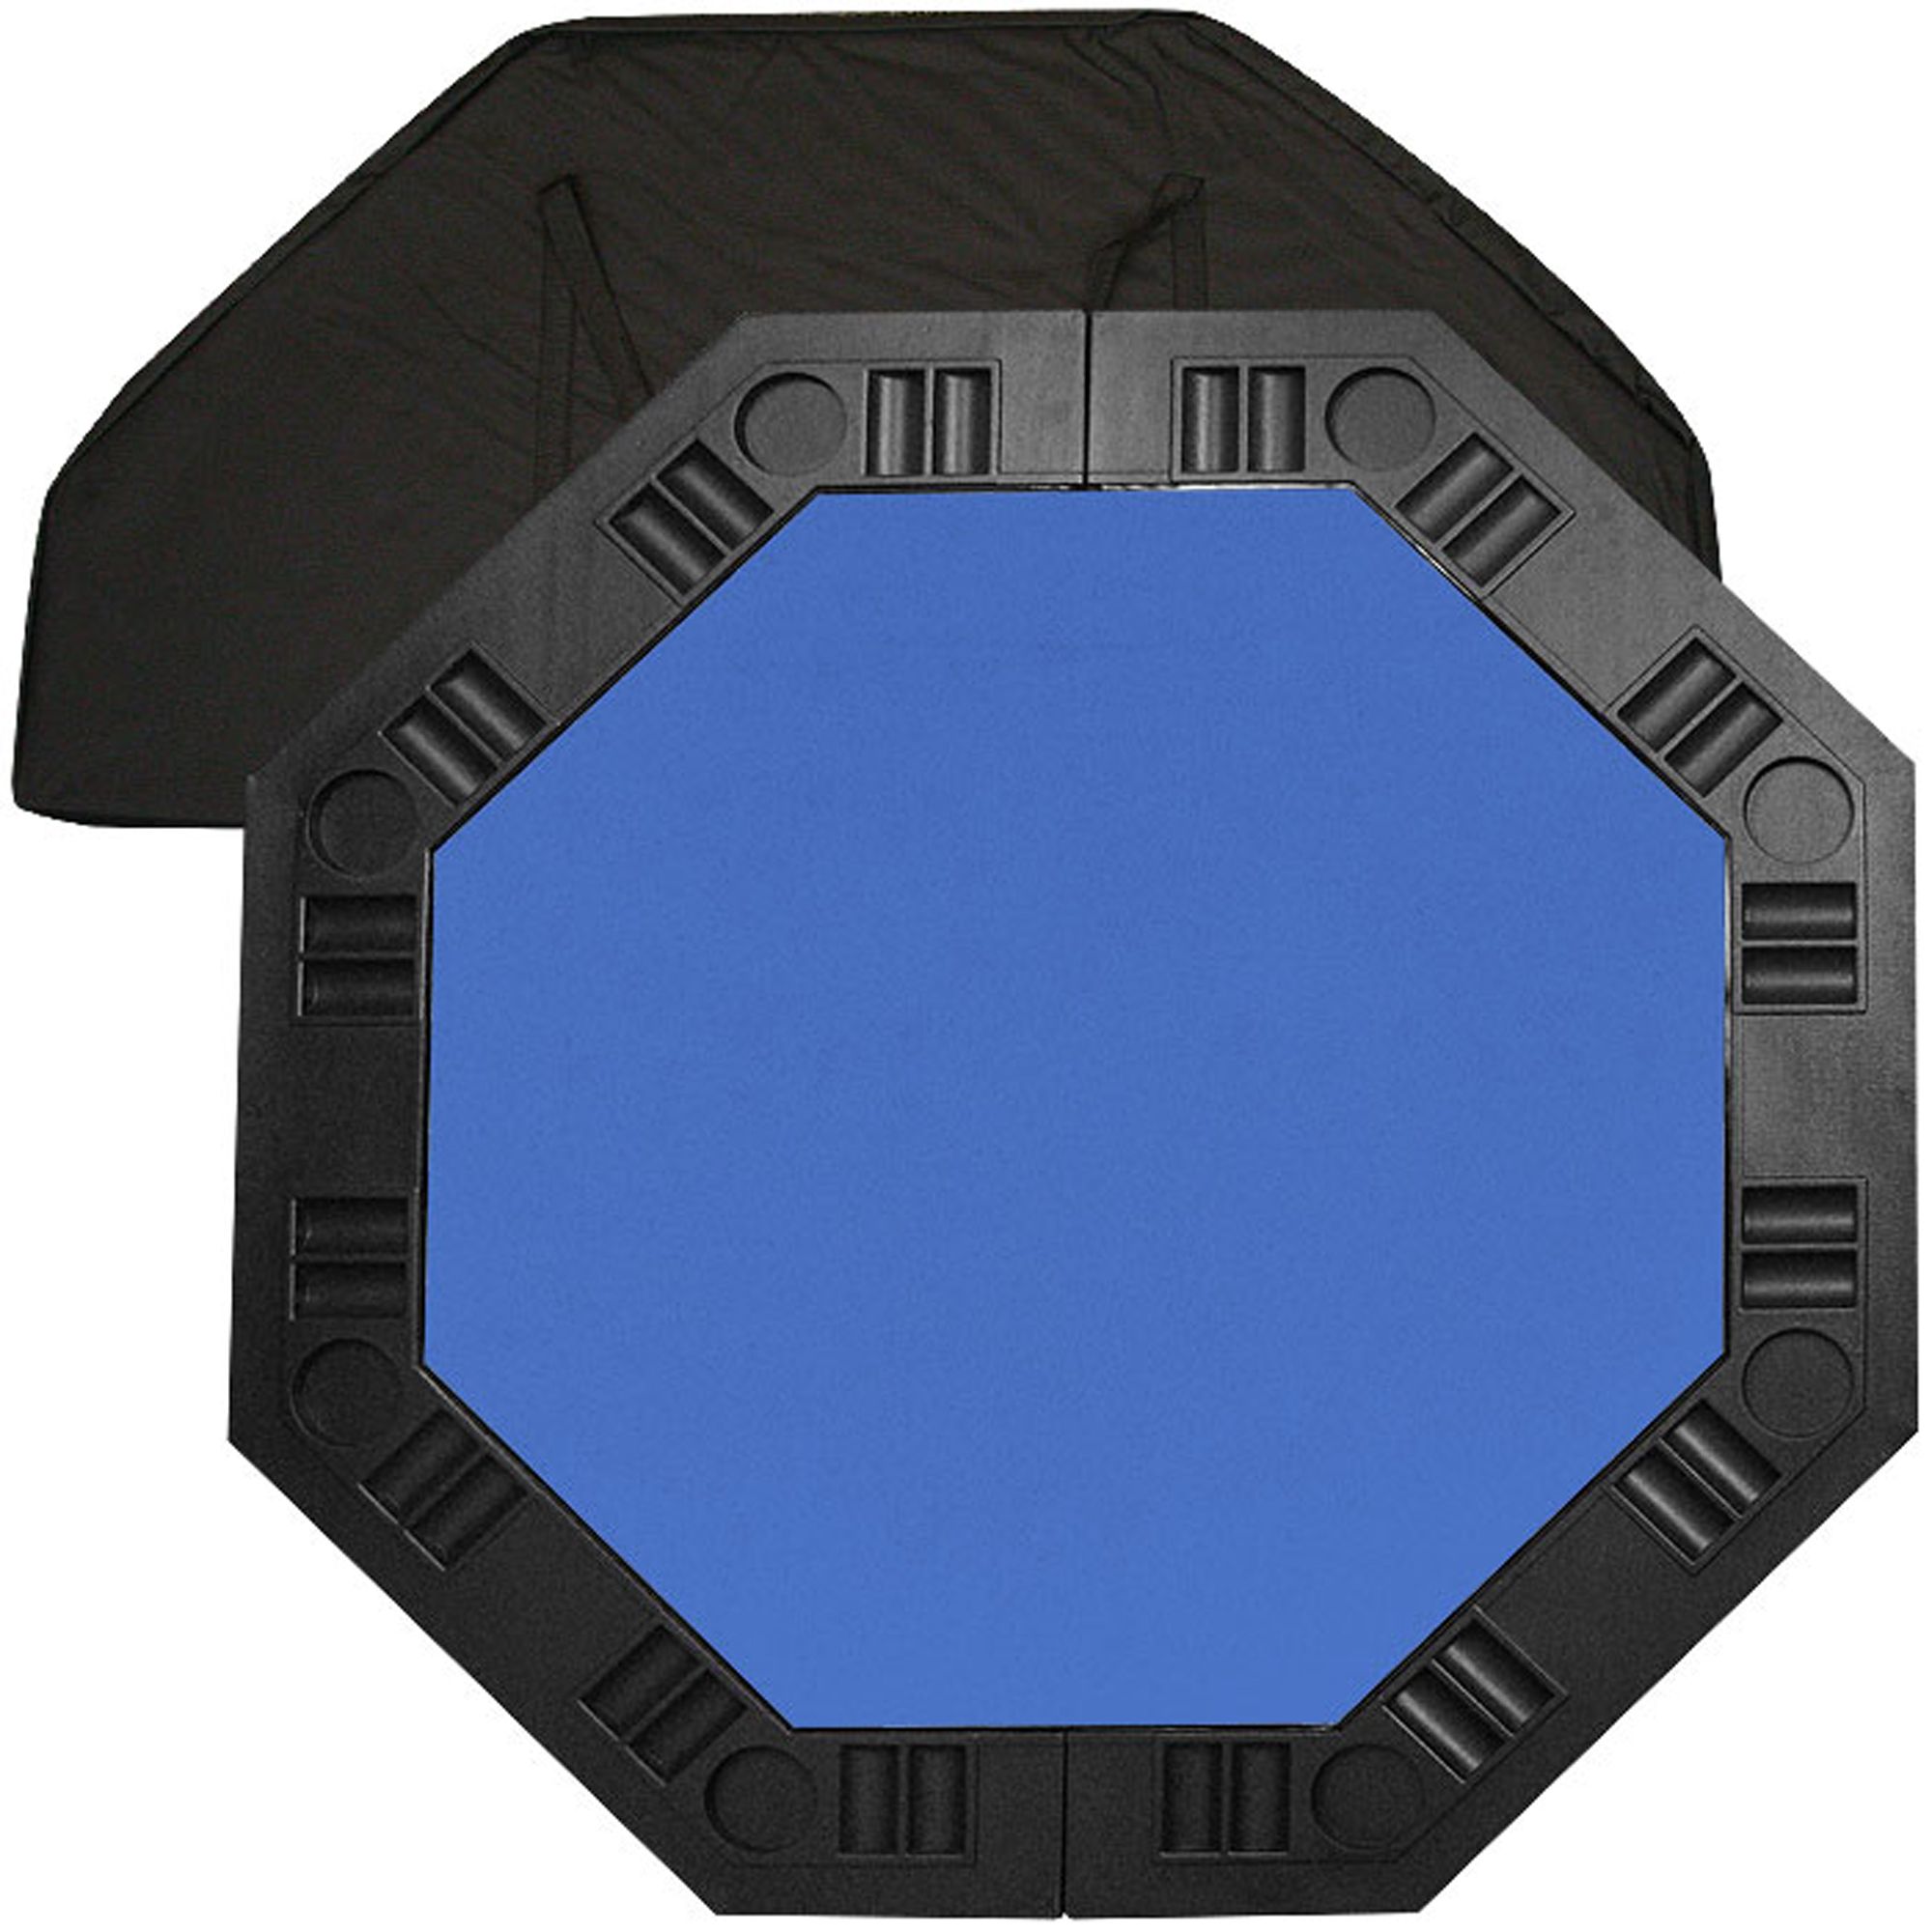 Trademark 8 Player Octagonal Table top - Blue - 48 inch